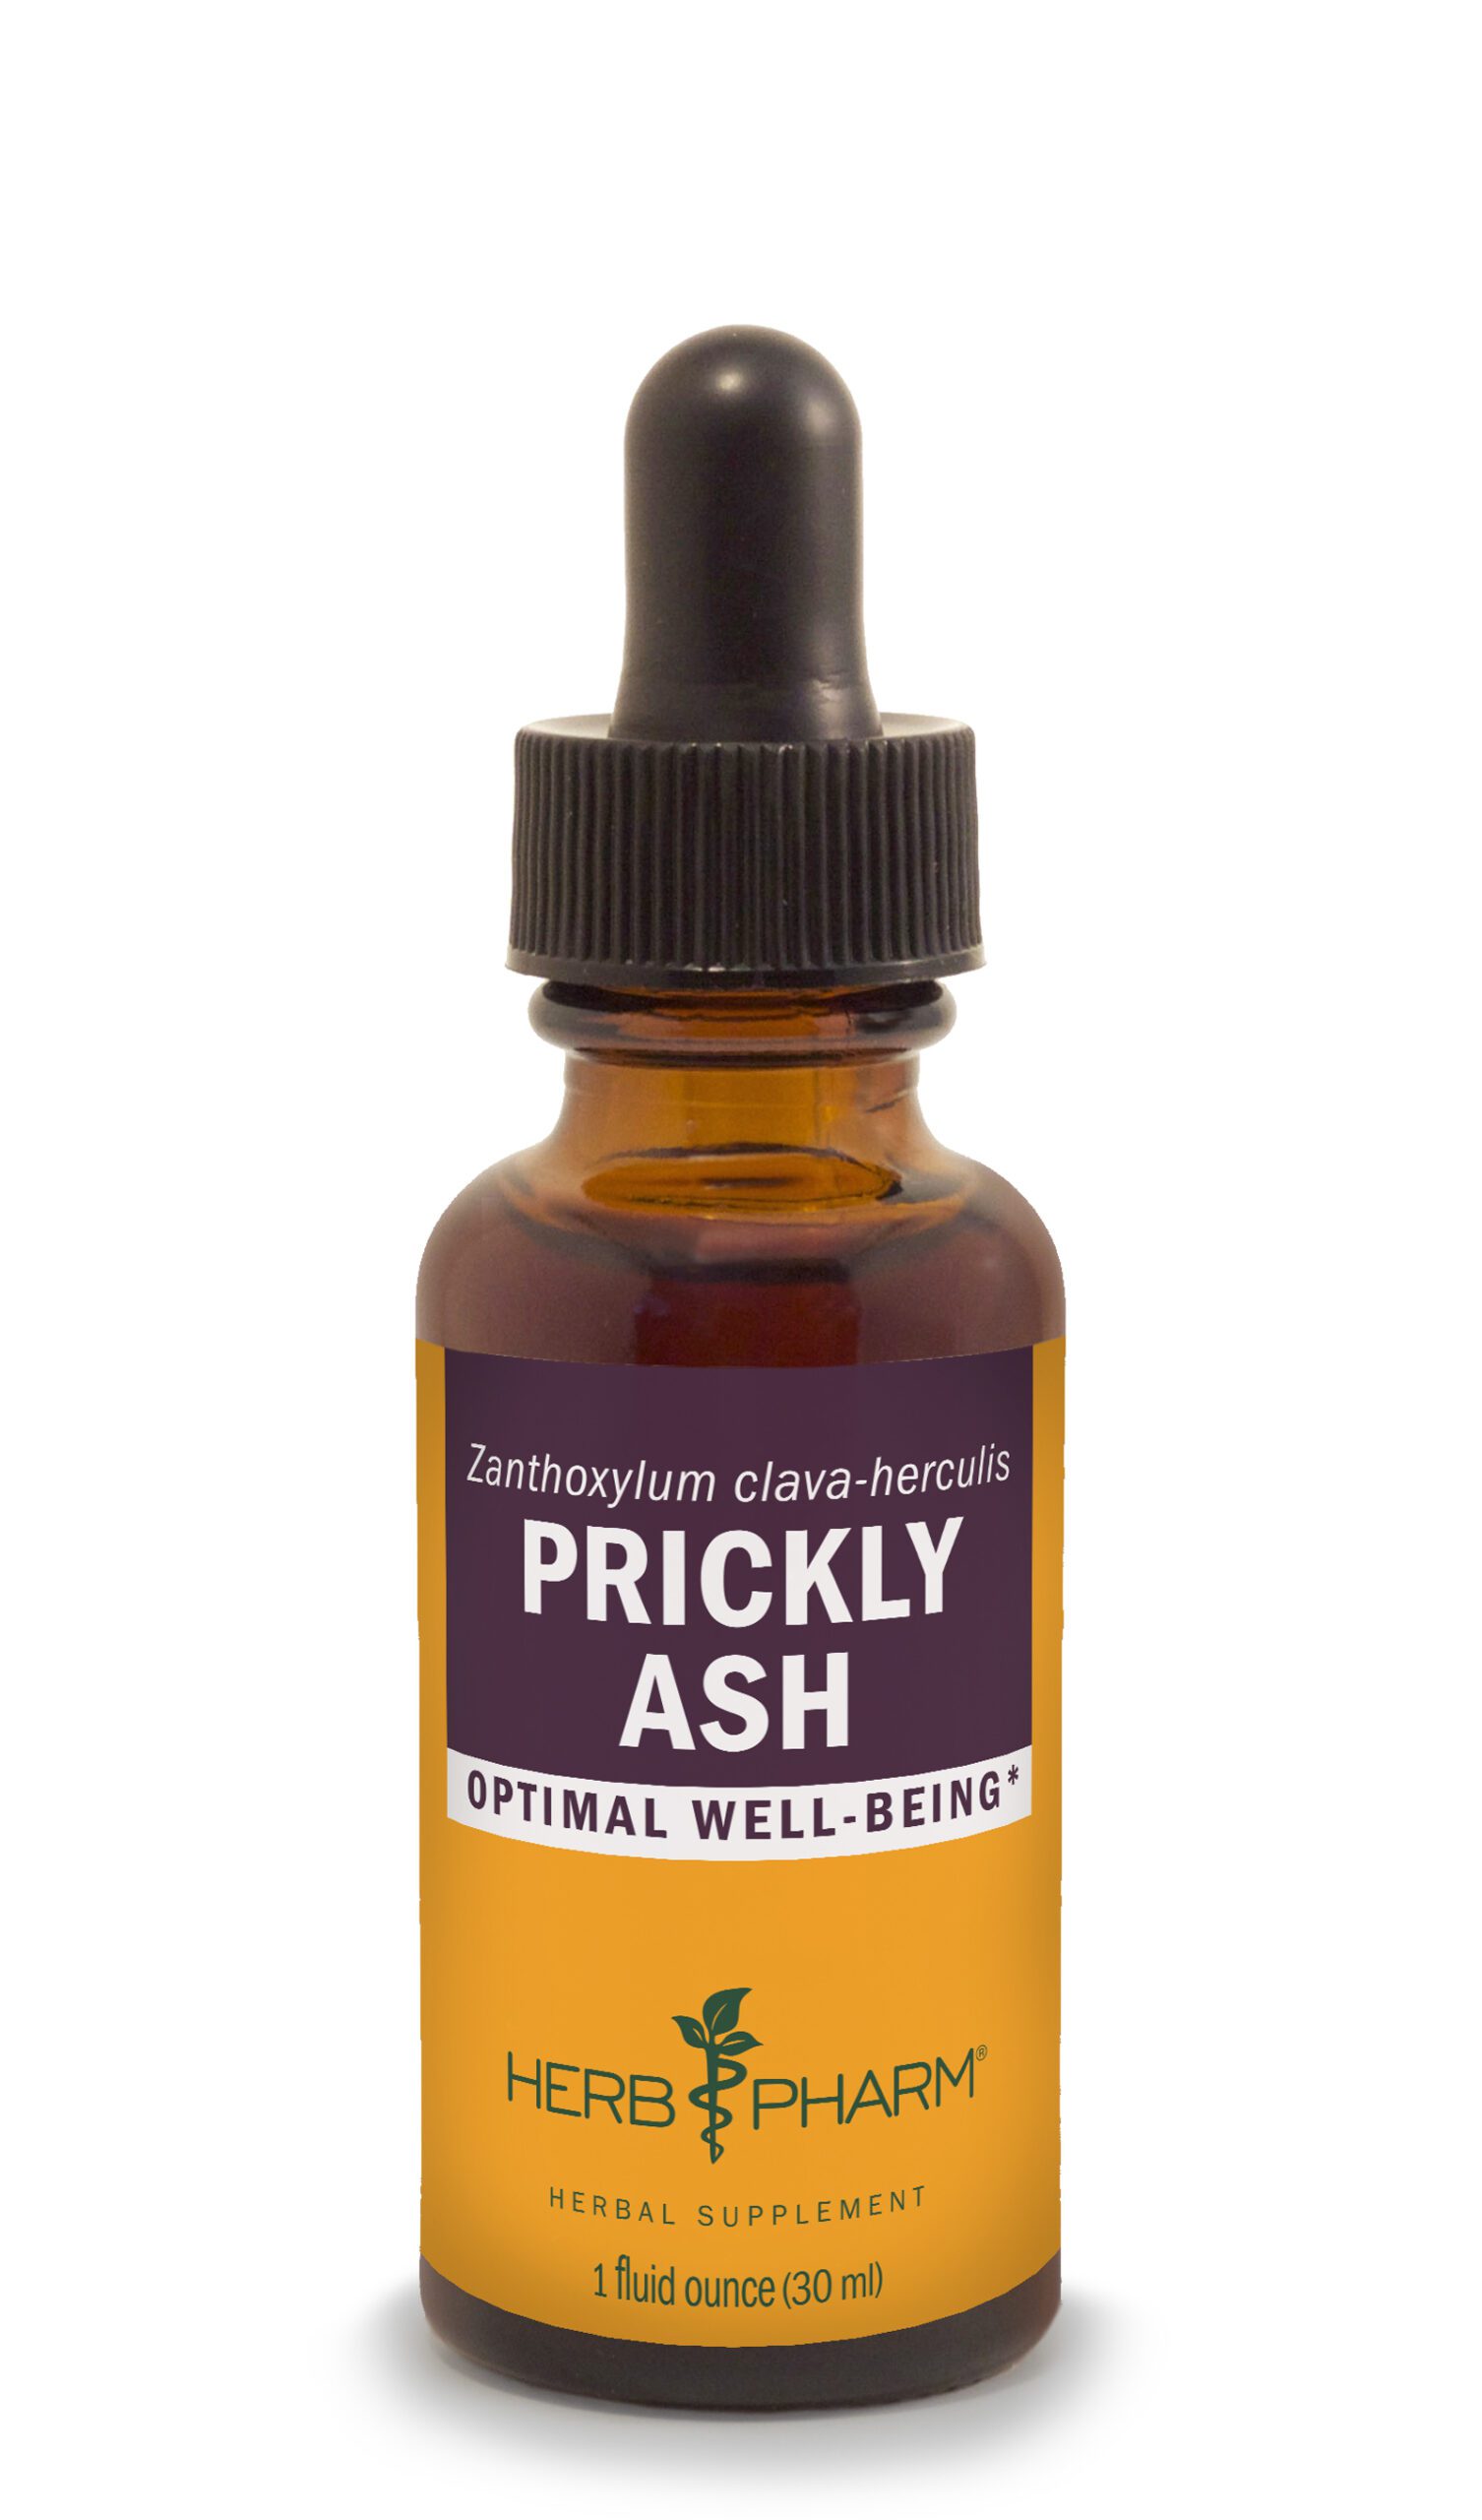 Product Listing Image for Herb Pharm Prickly Ash Tincture 1oz